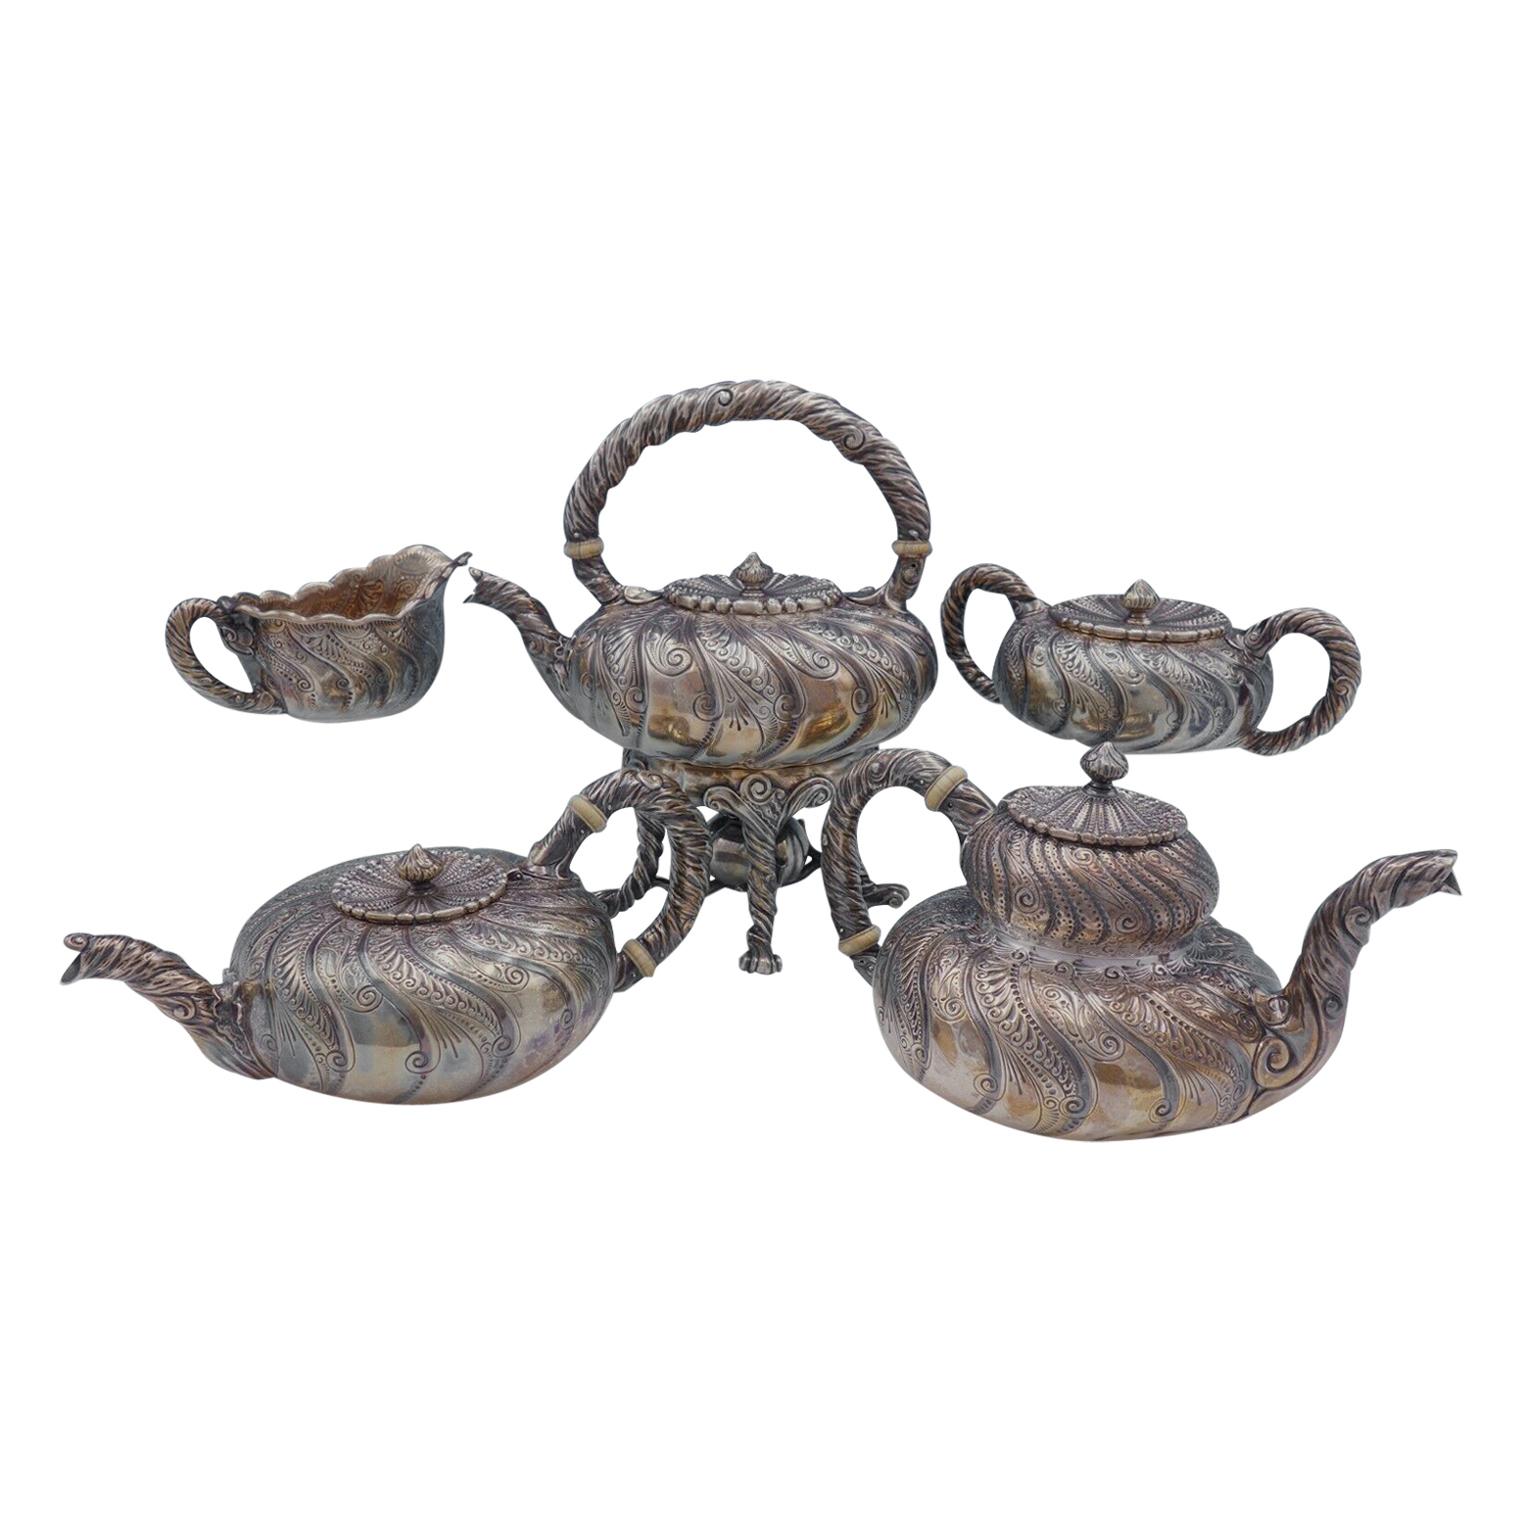 Saint Cloud by Gorham Sterling Silver Tea Set 5-Piece #1810 with Swirled Body